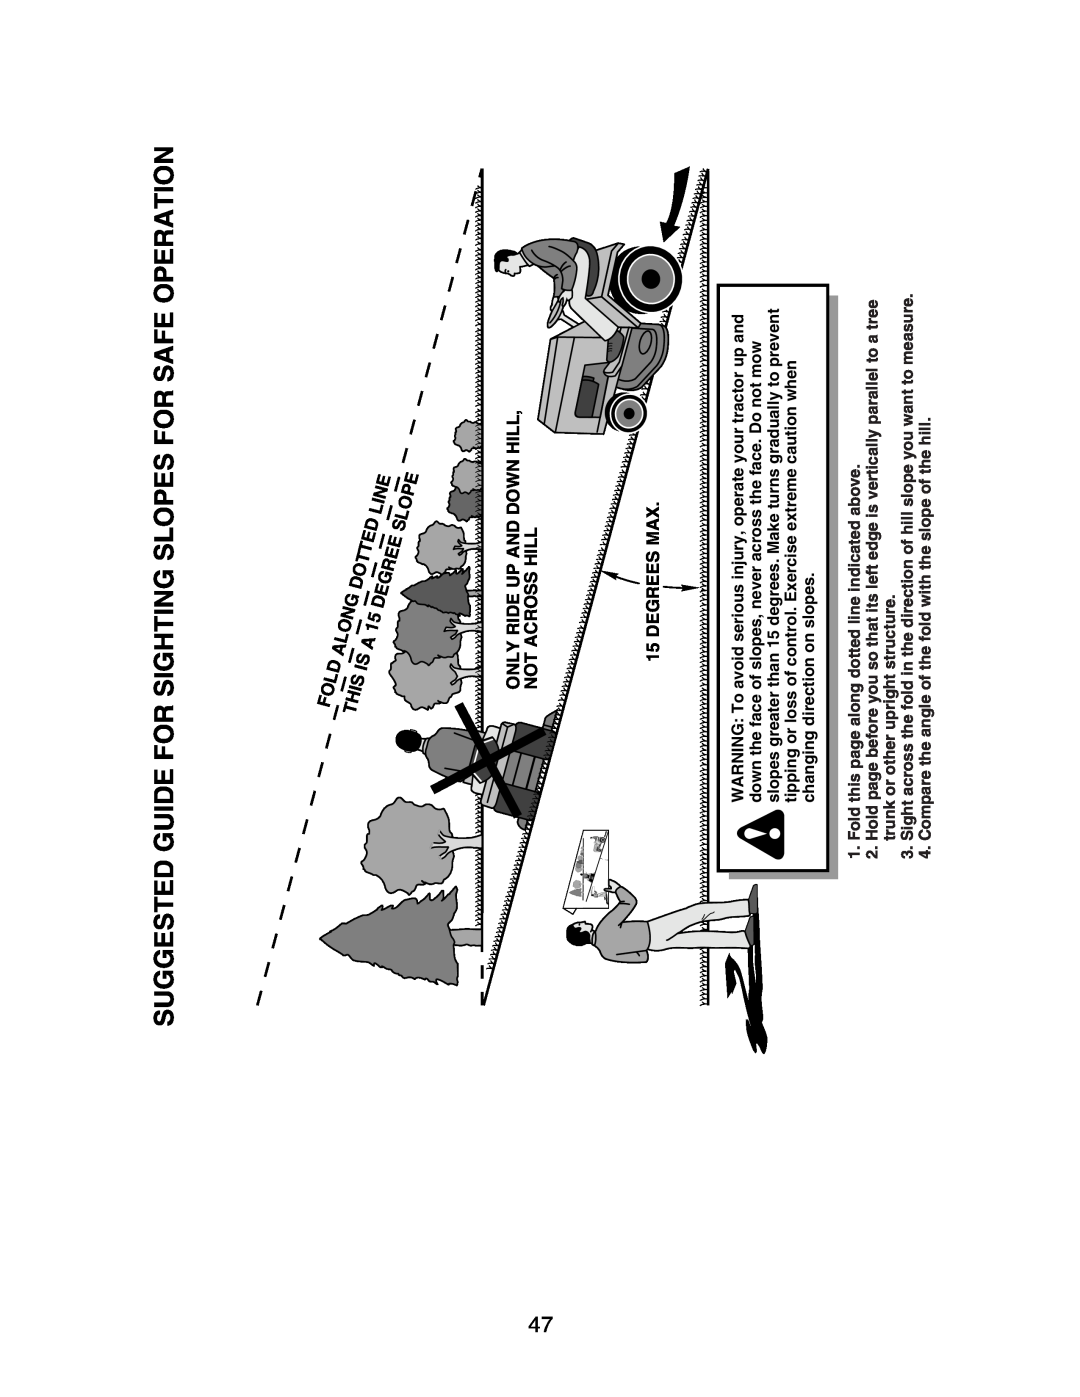 Poulan 191663 manual Suggested Guide For Sighting Slopes For Safe Operation, Fold, Along, This, Dotted, Line, Degree 